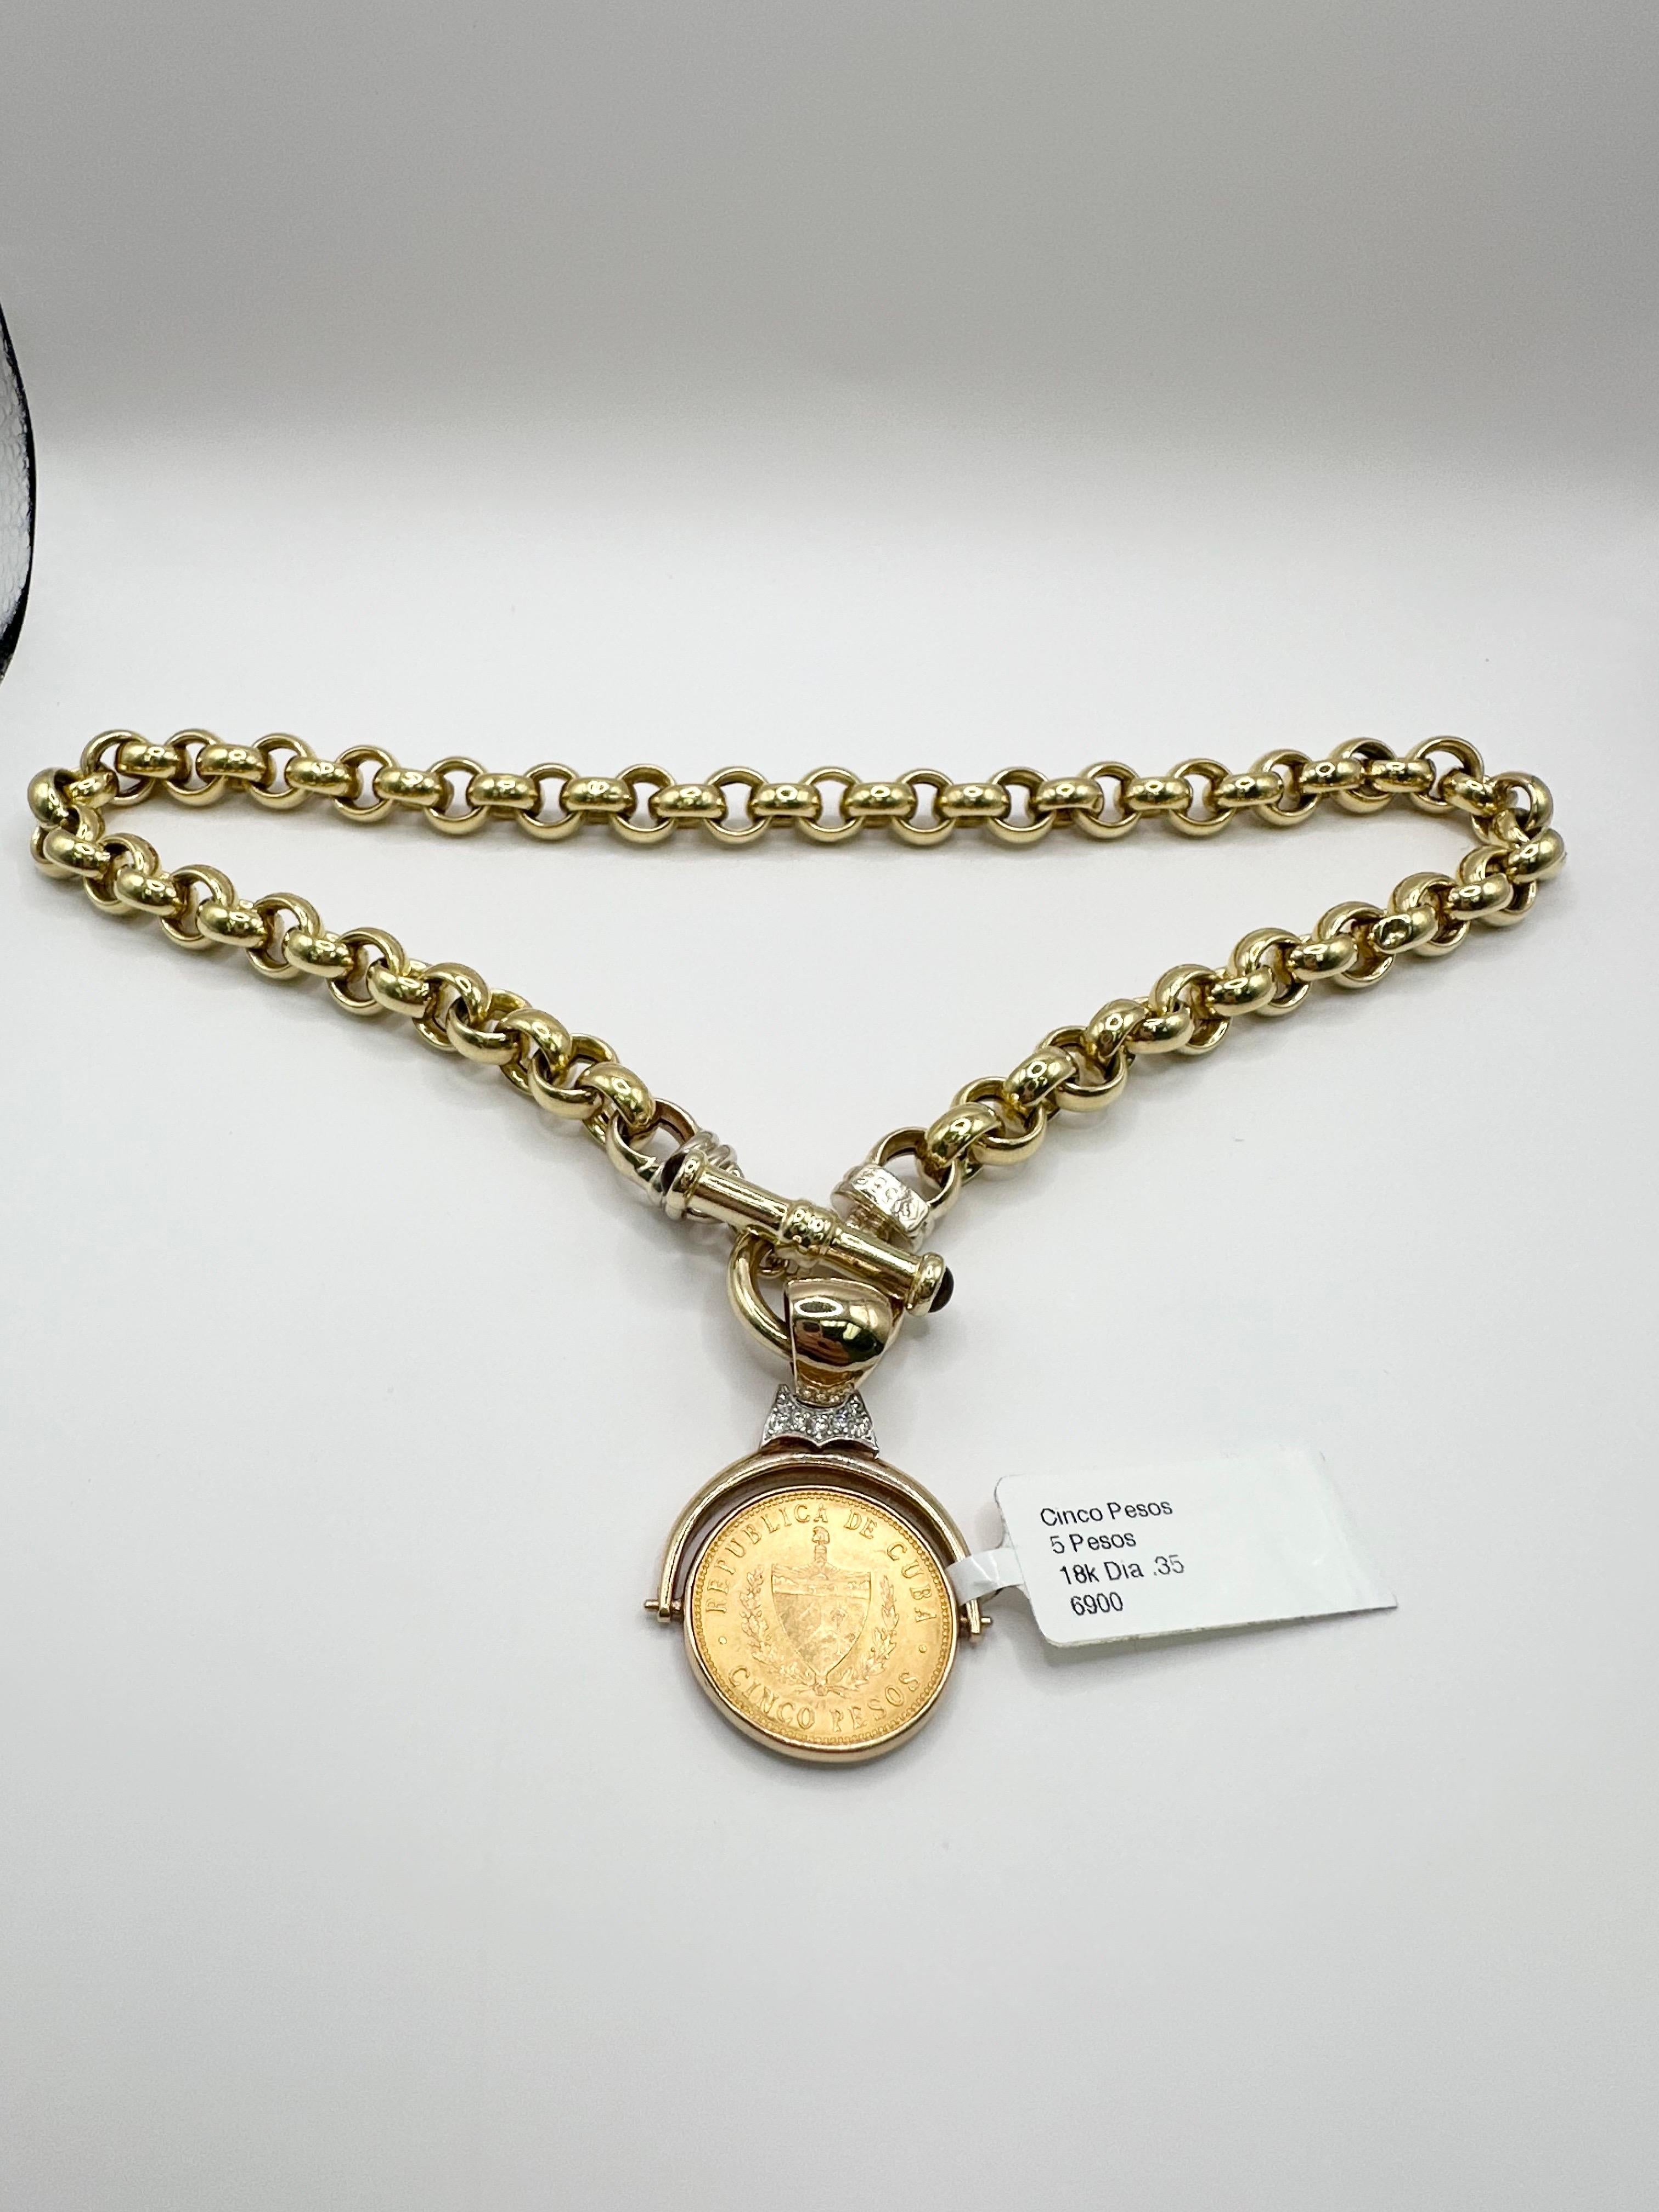 Diamond necklace with 5 cents coin in the middle made in 18KT yellow gold! Stunning piece with large links on the chain! If you want the coin with pendant only please contact us and we can sell the coin pendant separately from the chain.

Metal